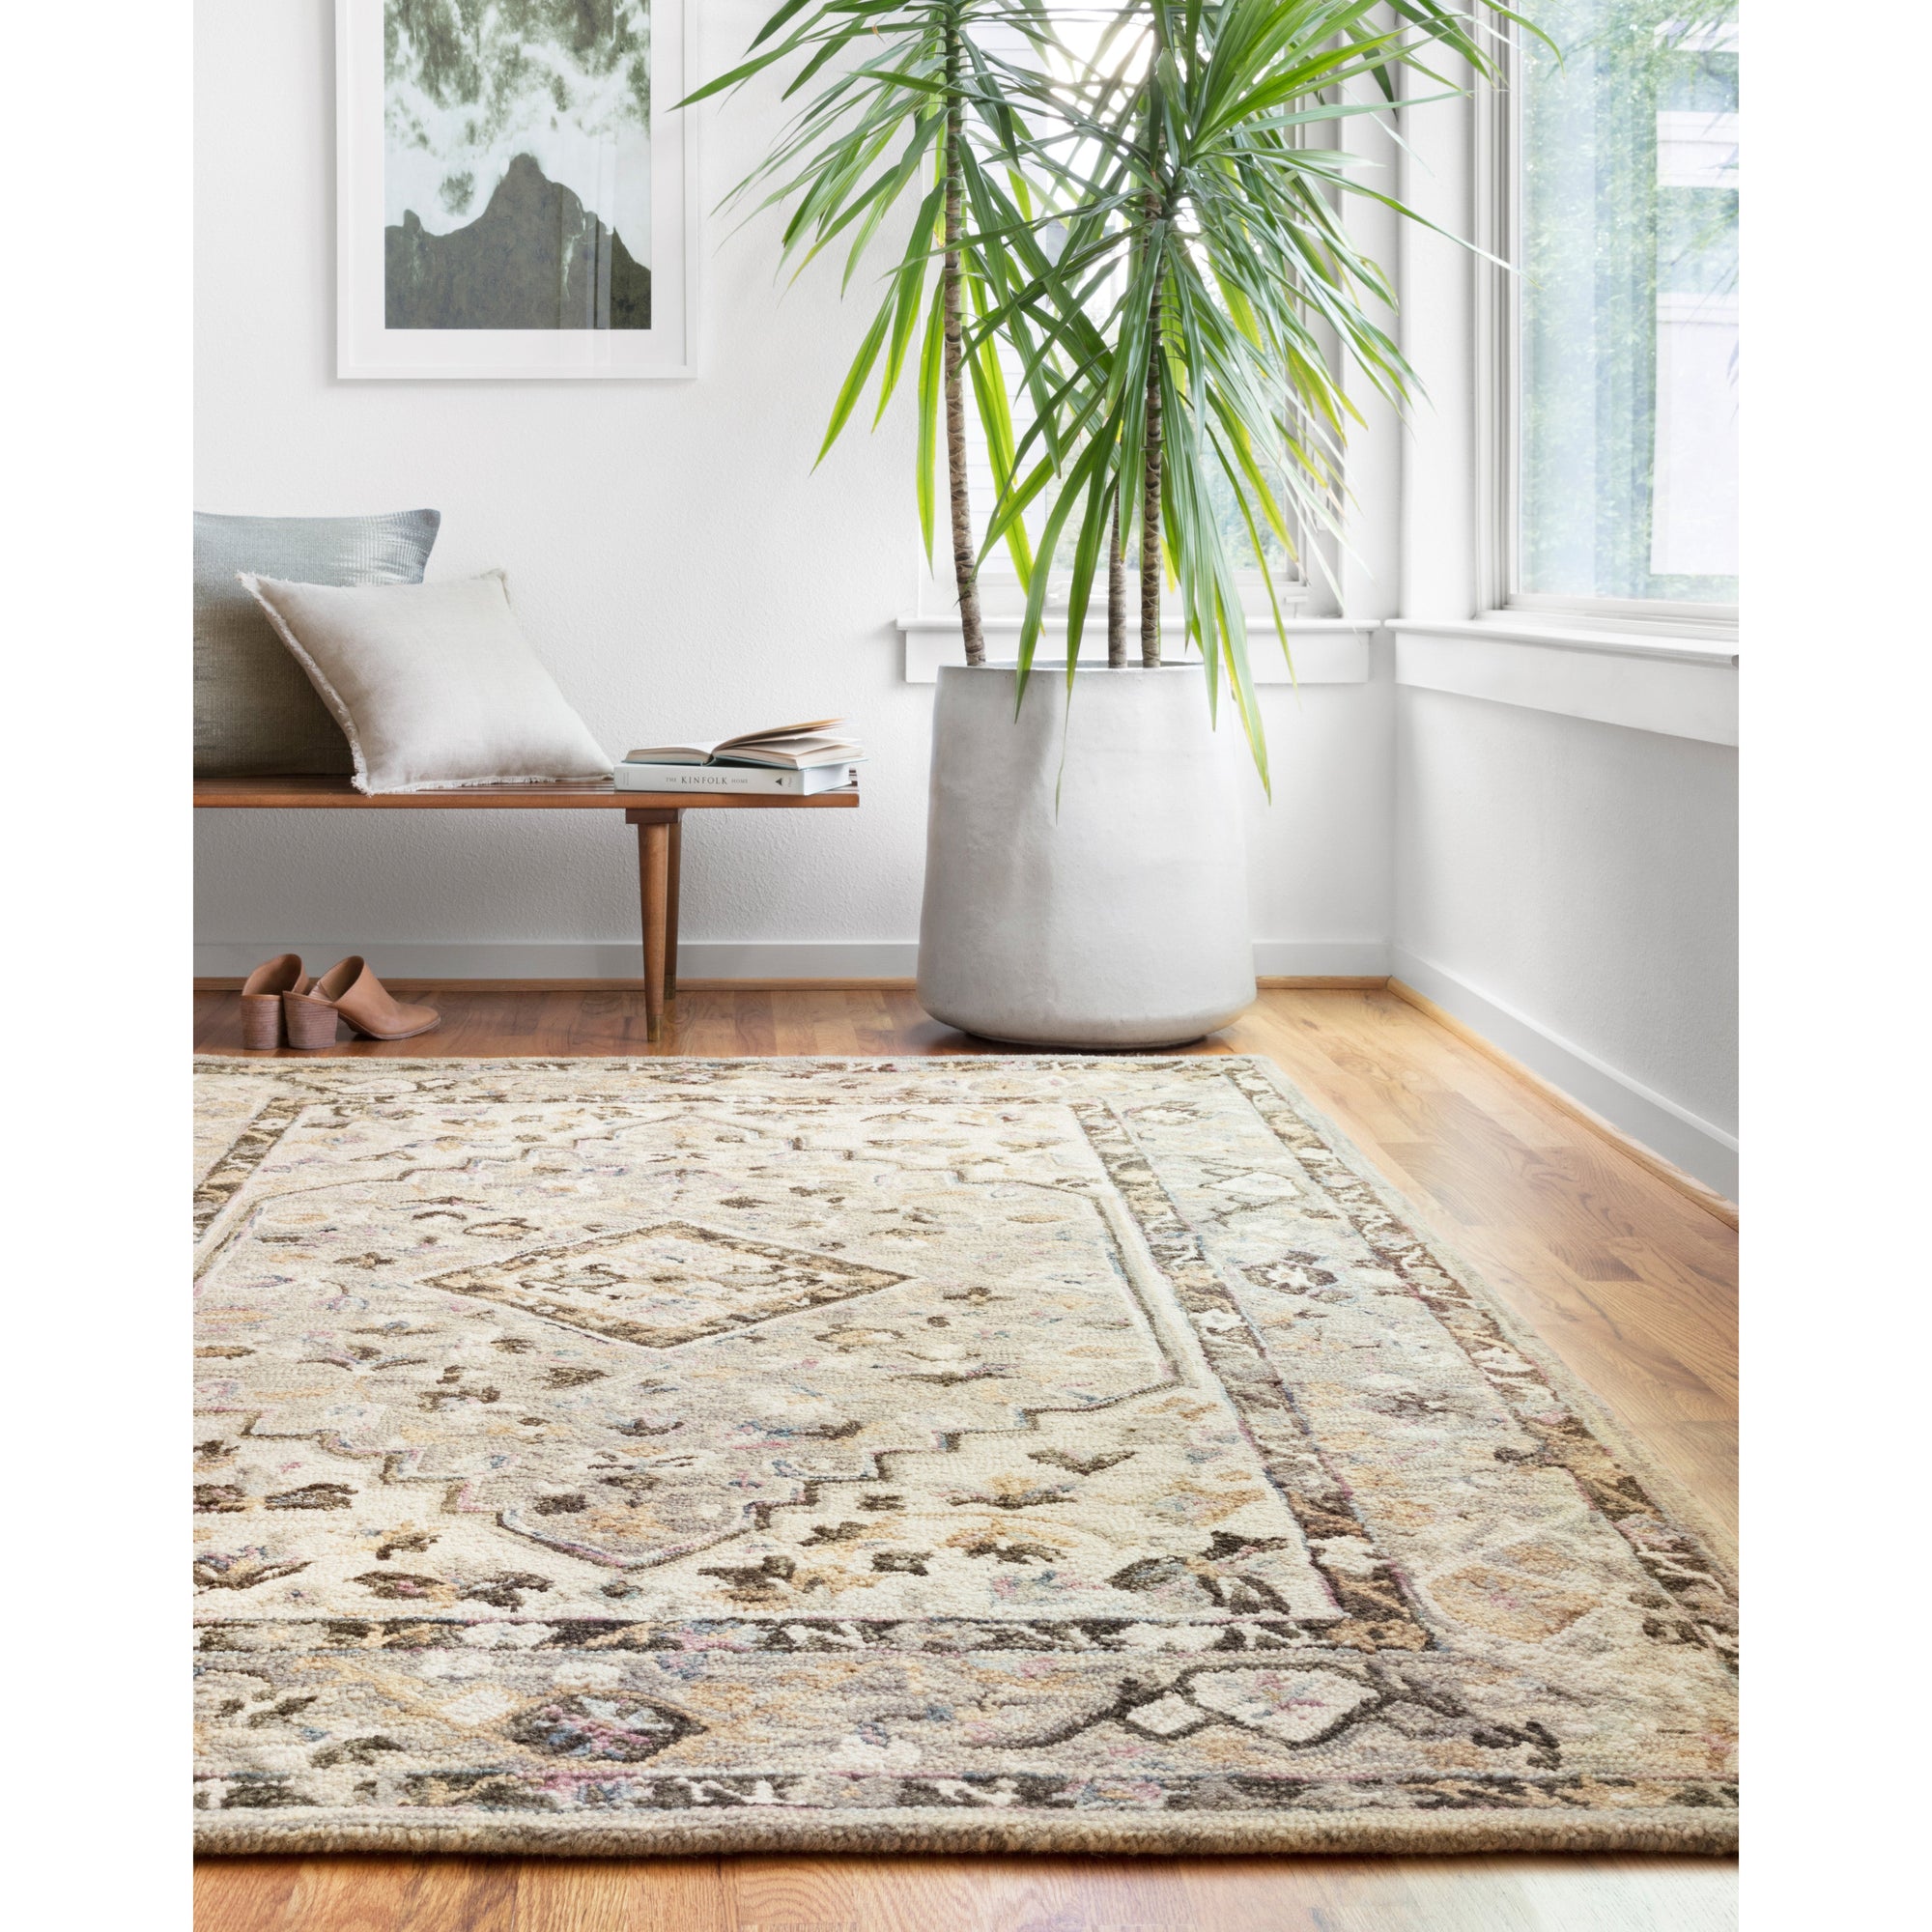 Rugs by Roo Loloi Beatty Grey Ivory Area Rug in size 18" x 18" Sample